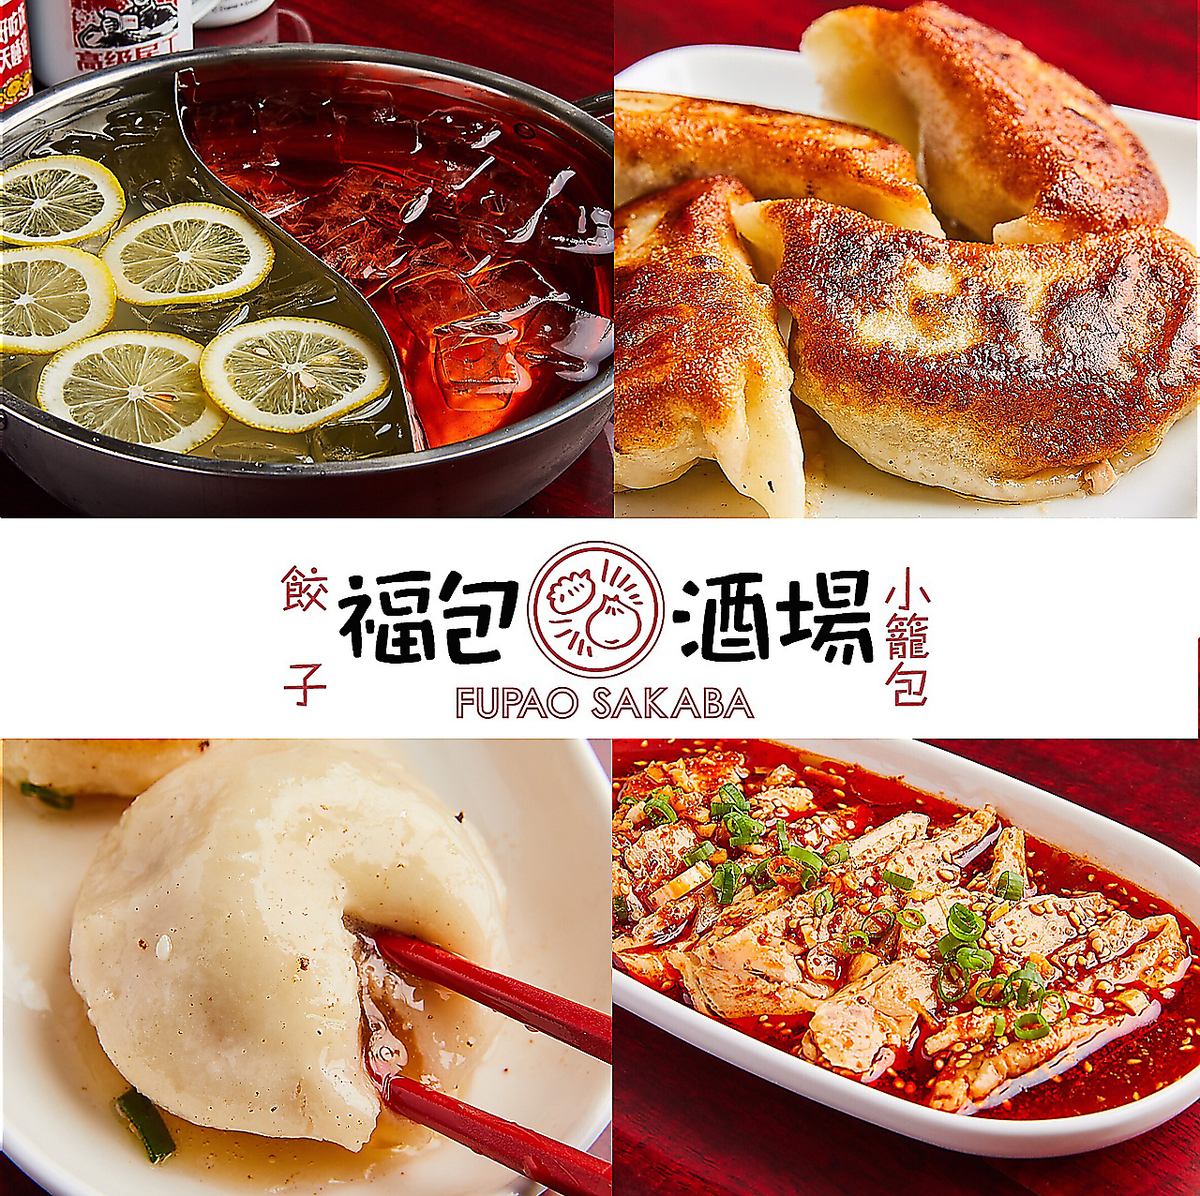 Hot pot sour, which is a hot topic on SNS, has opened for the first time in the Shonan area!